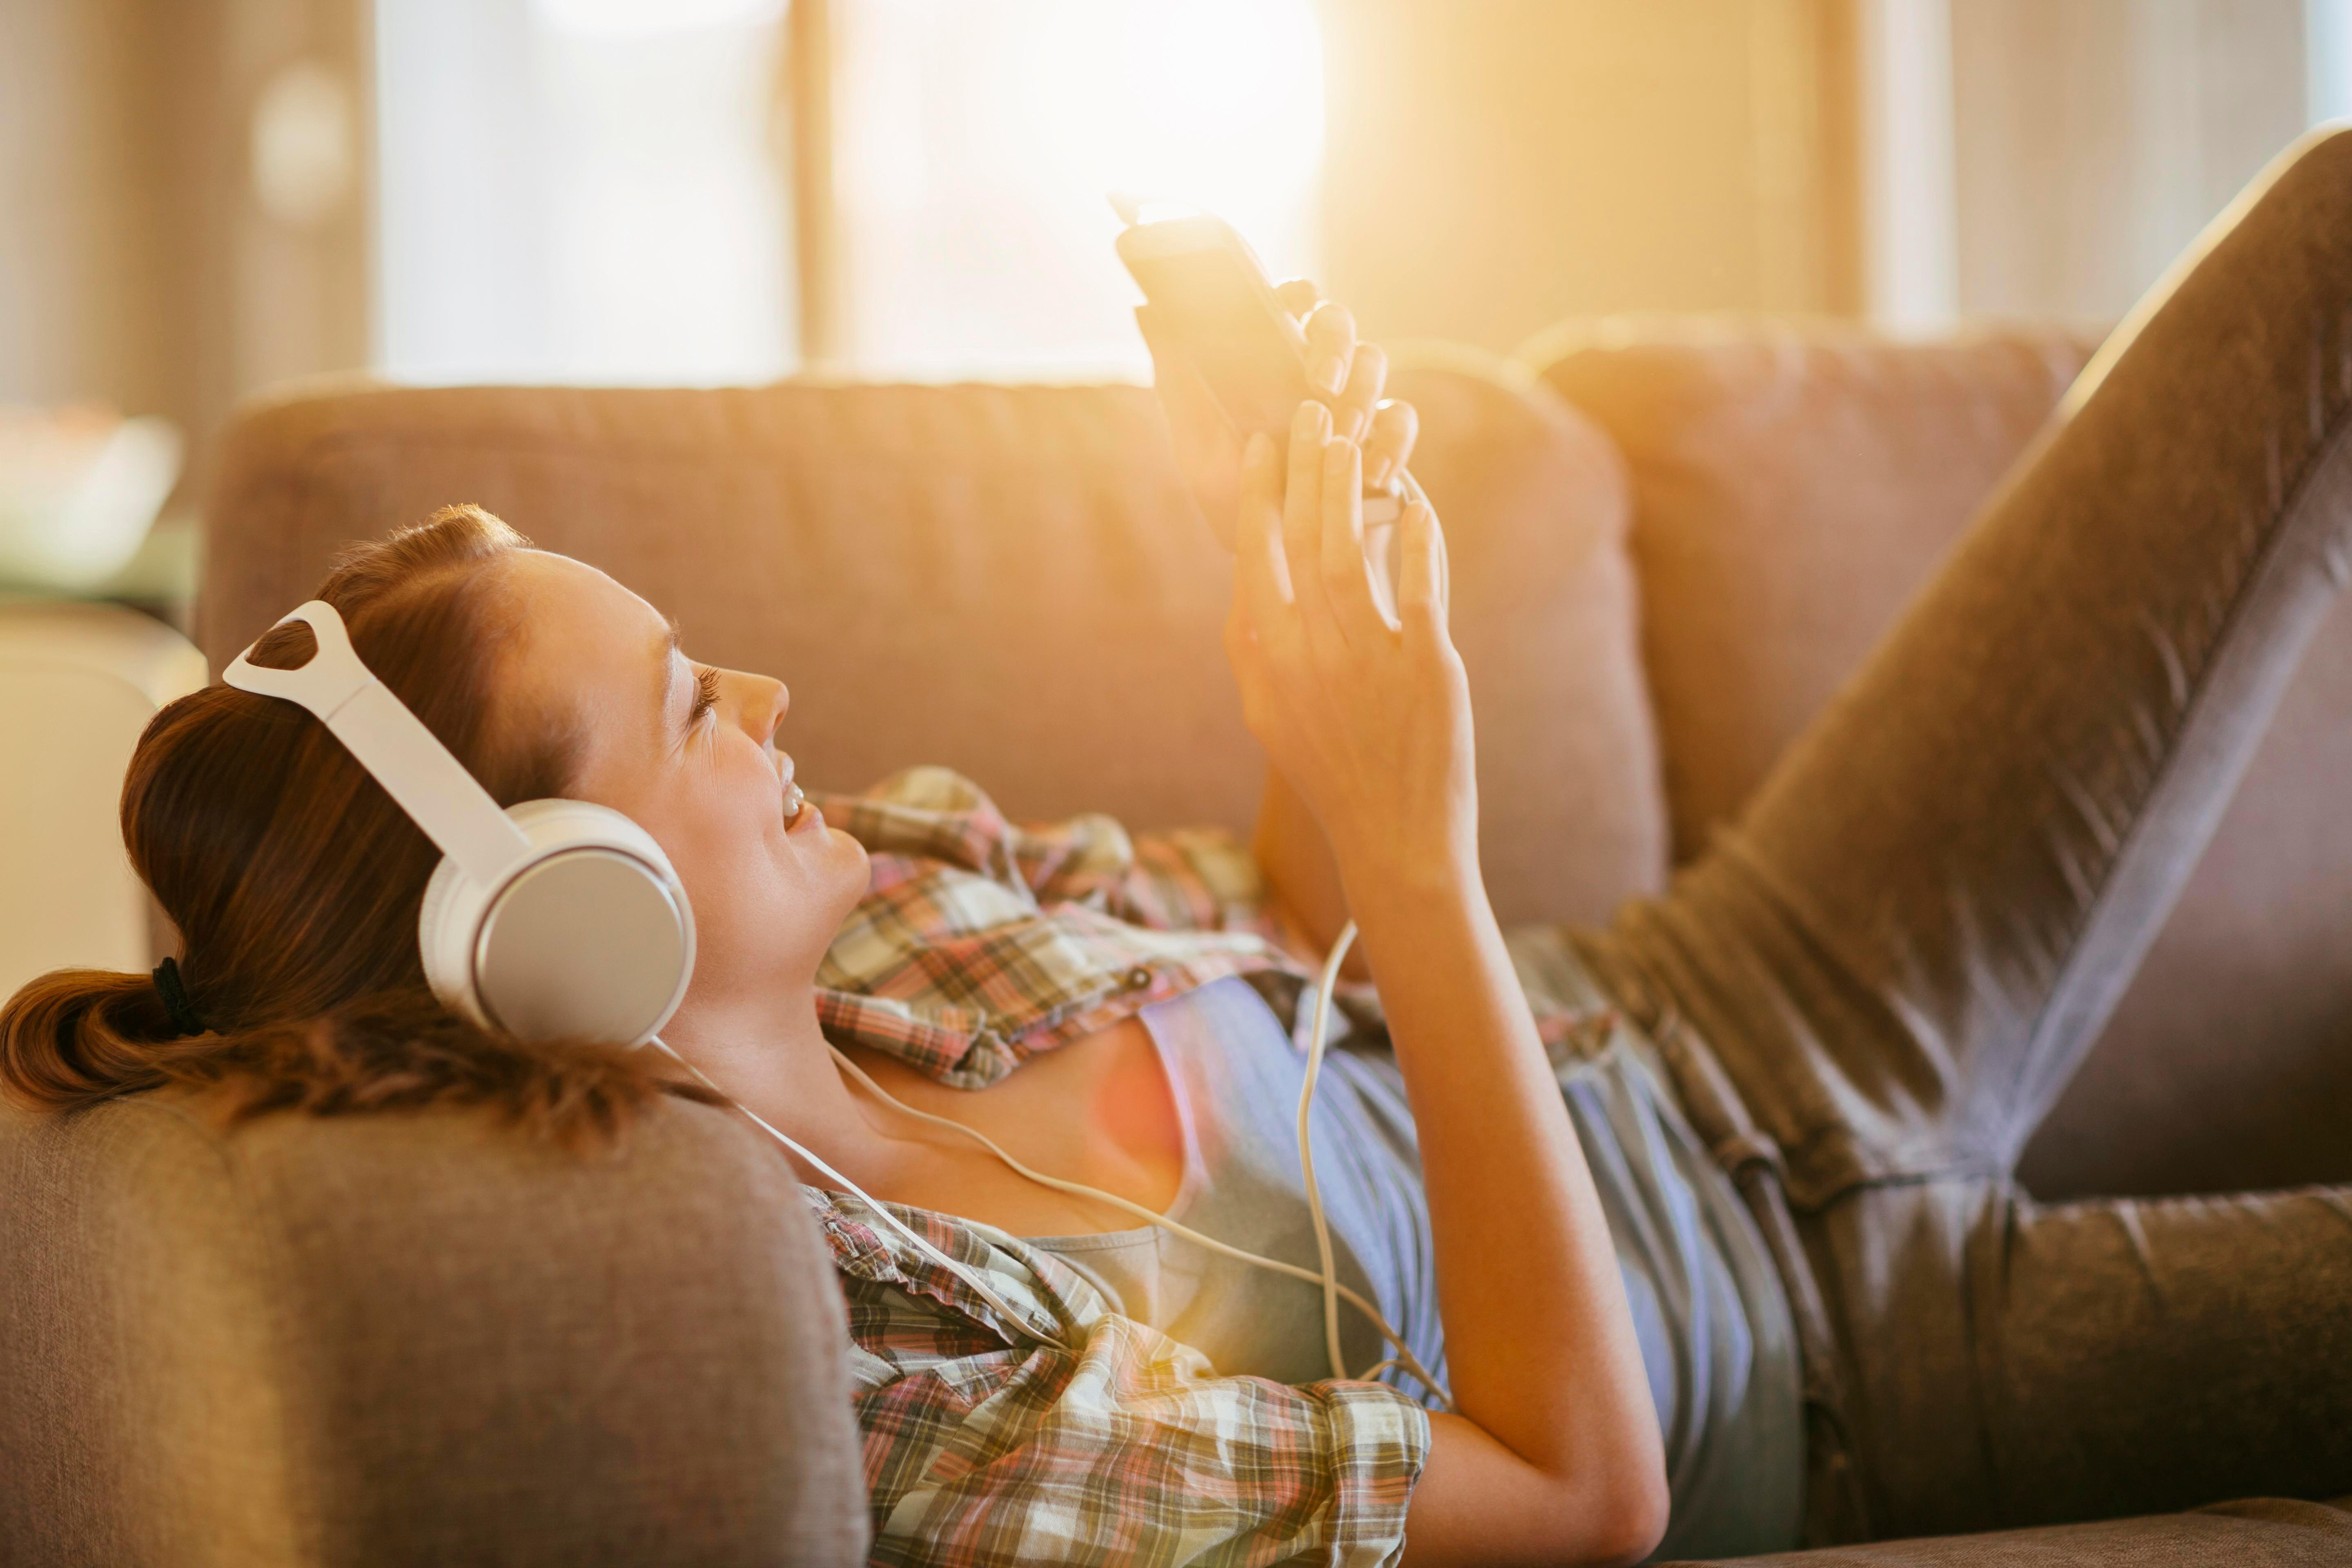 6 reasons to listen to music as soon as you wake up #1